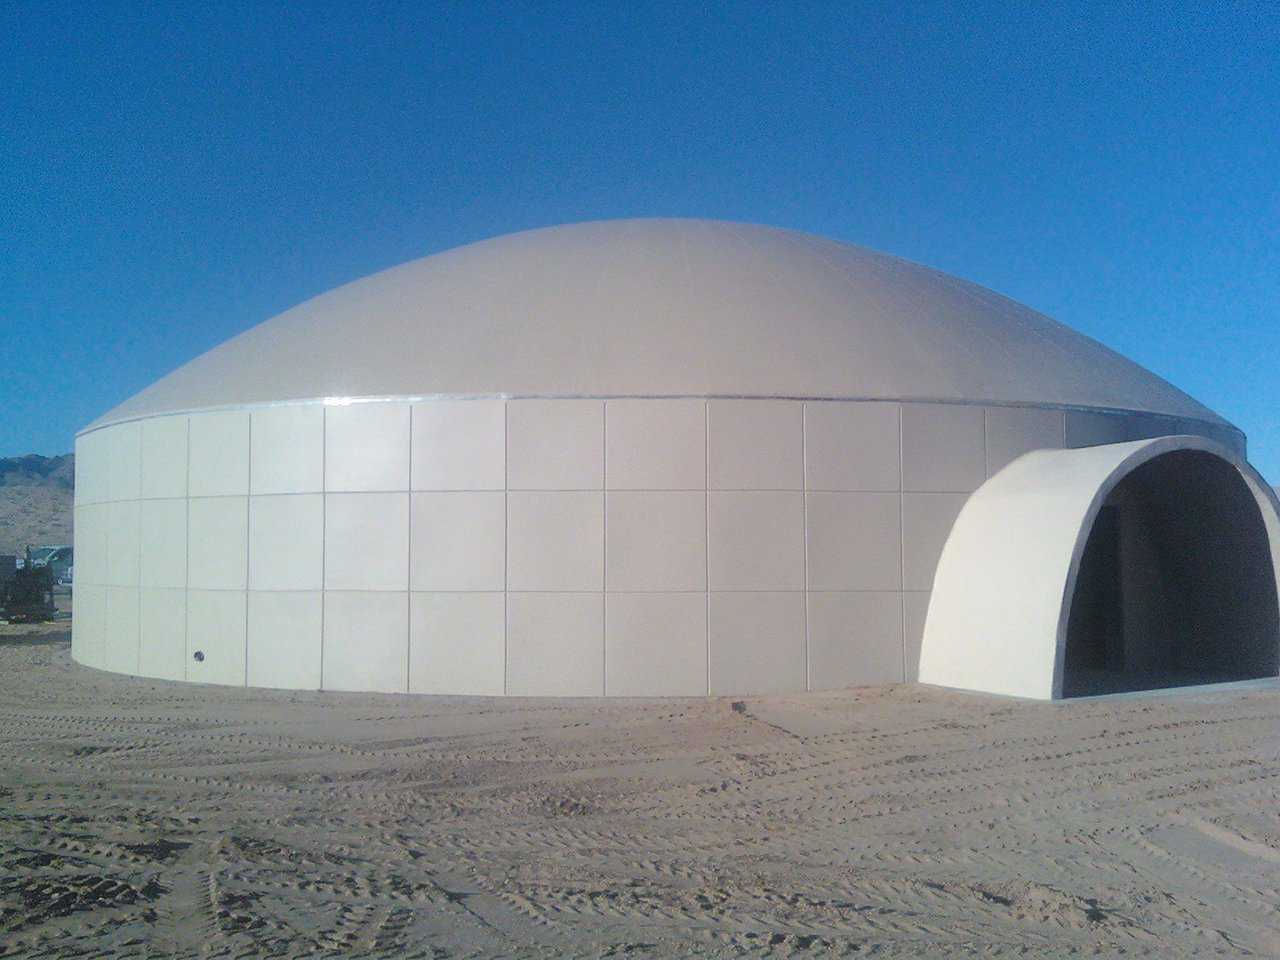 The dome that houses the Headquarters Office is 75′ × 15′ on a 20’ integrated stemwall and has a protected entry archway.